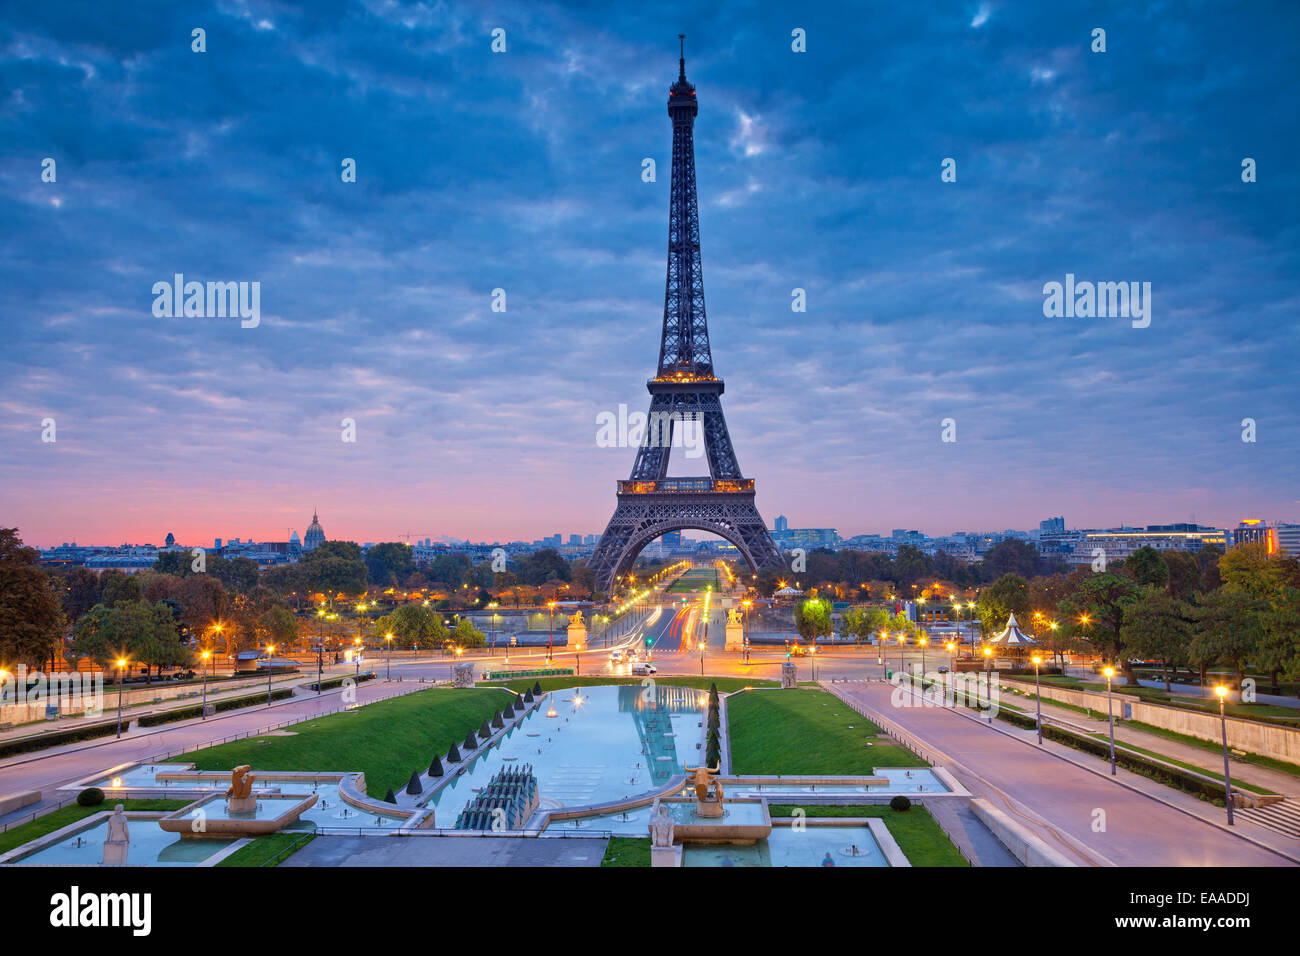 Image of Paris at sunrise with the Eiffel Tower. Stock Photo